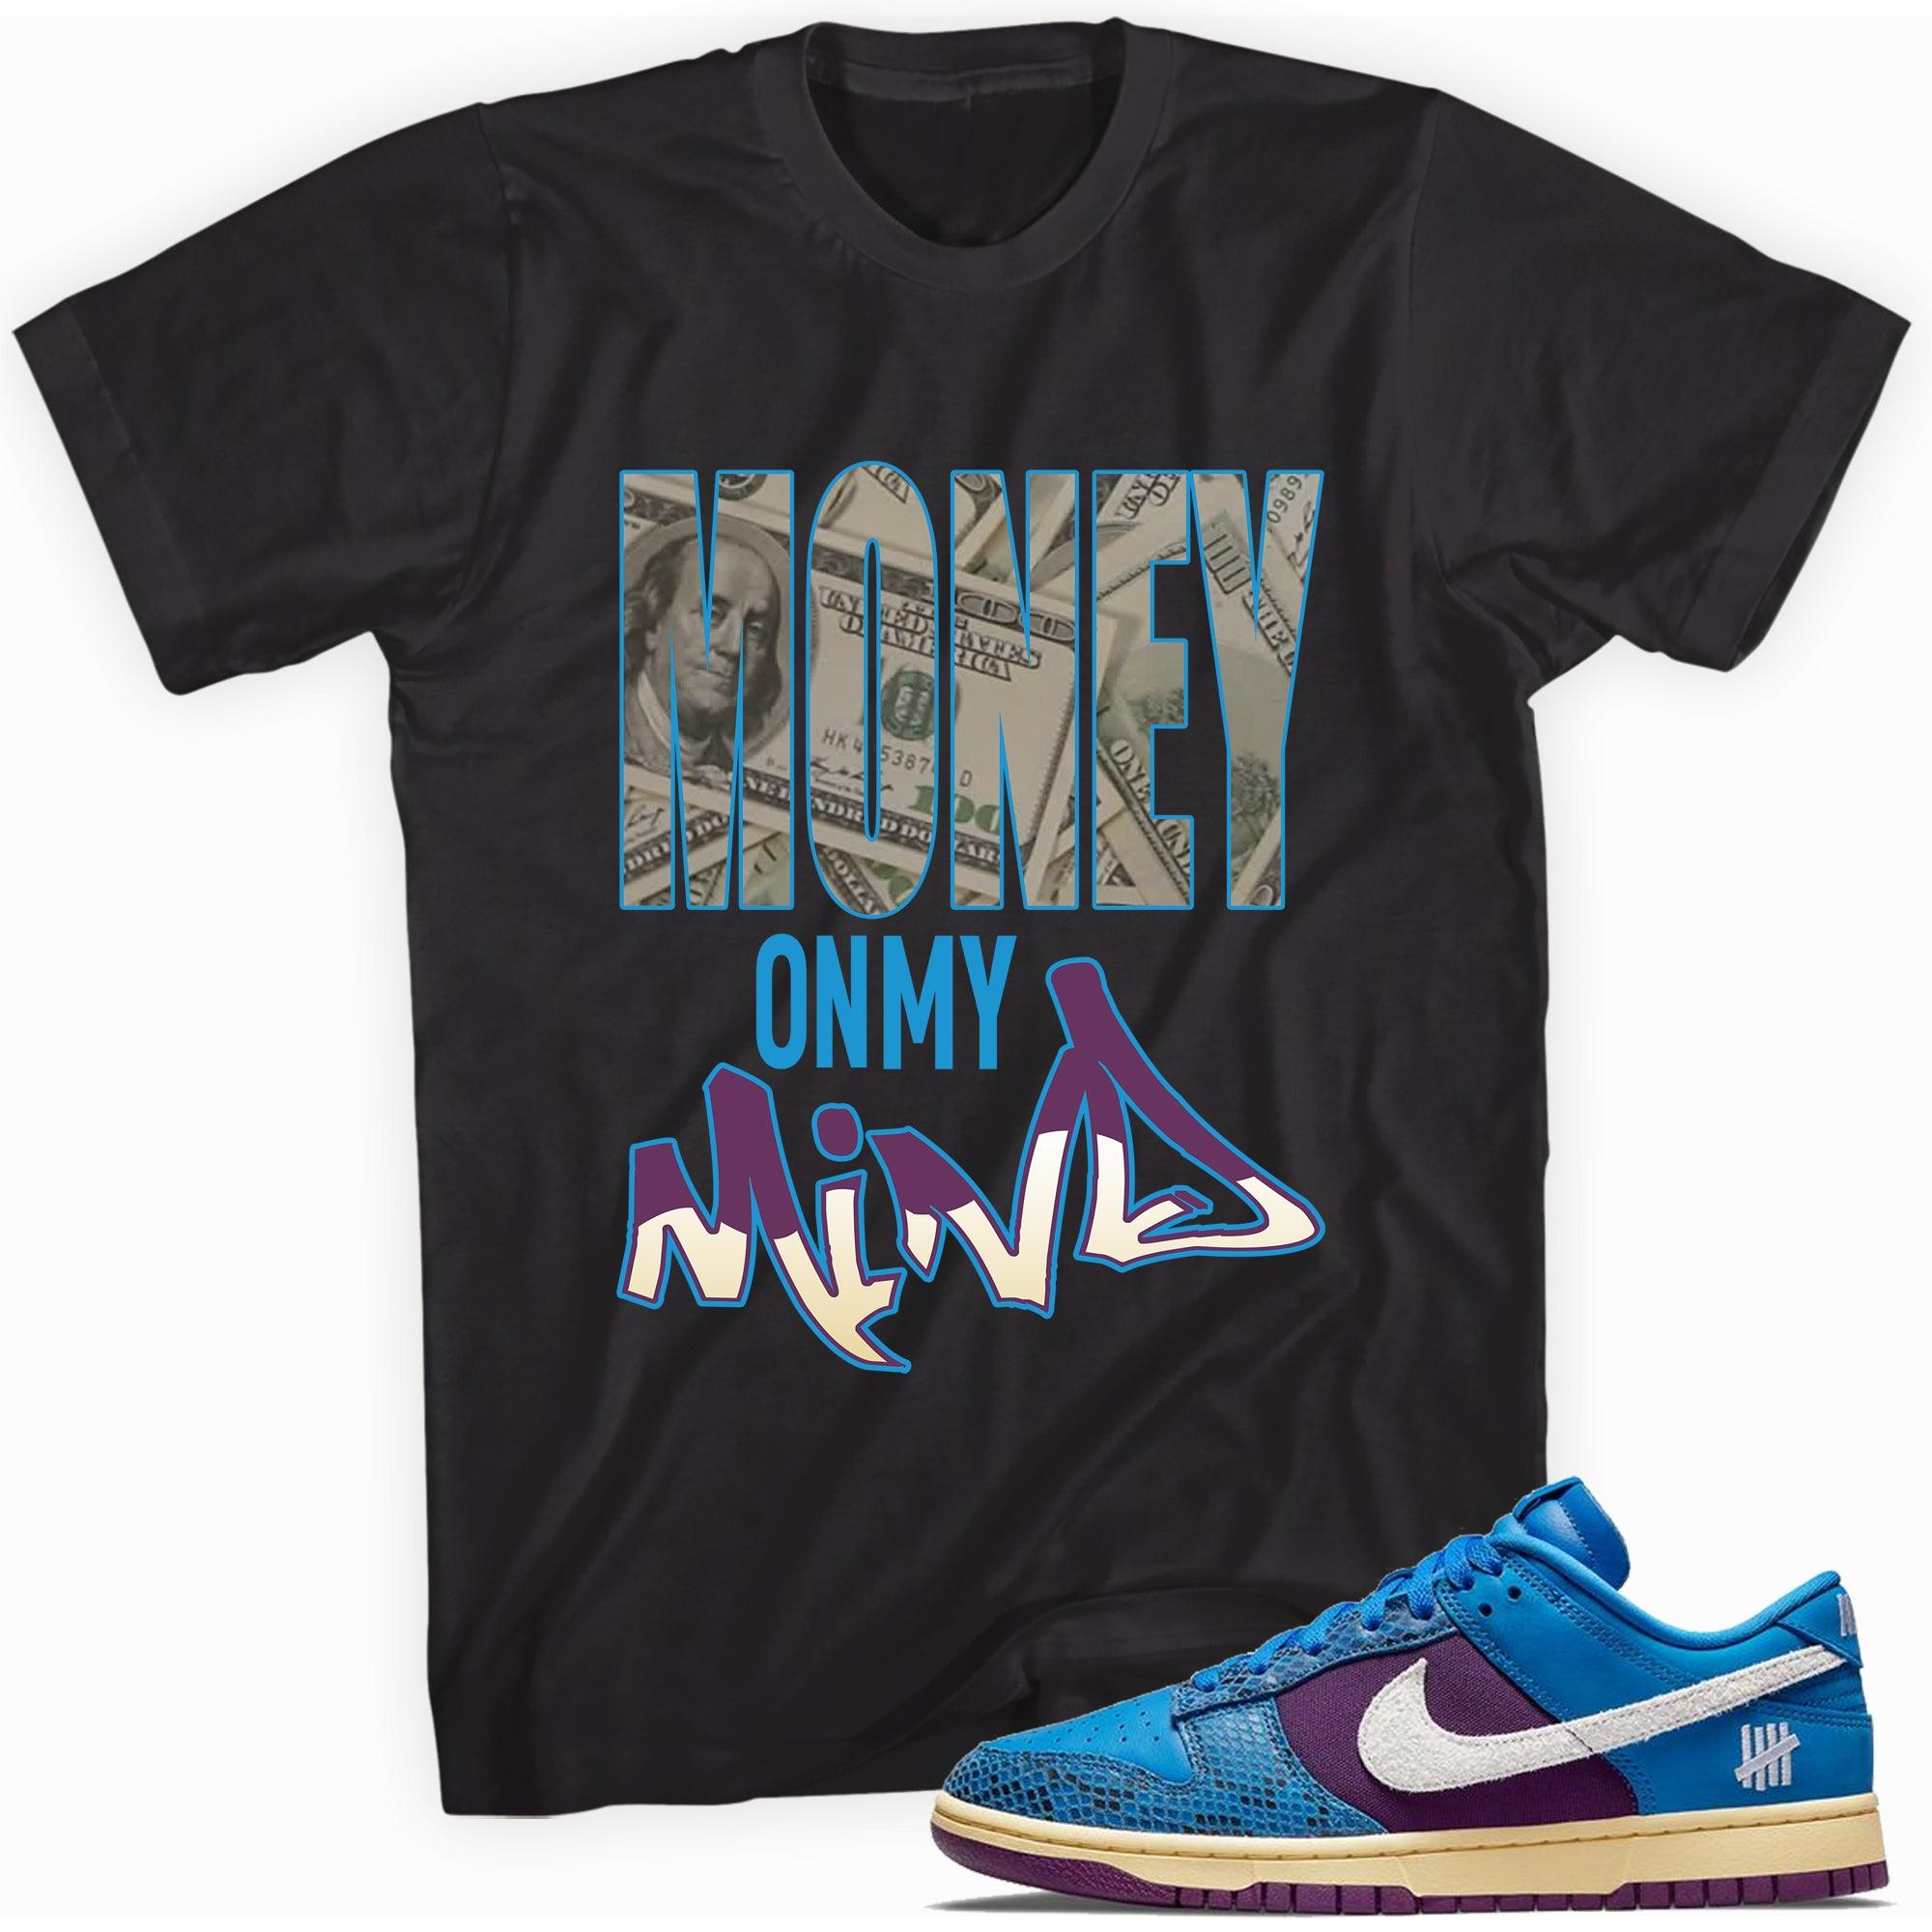 Money On My Mind Shirt Nike Dunk Low Undefeated 5 On It Dunk vs AF1 Sneakers photo